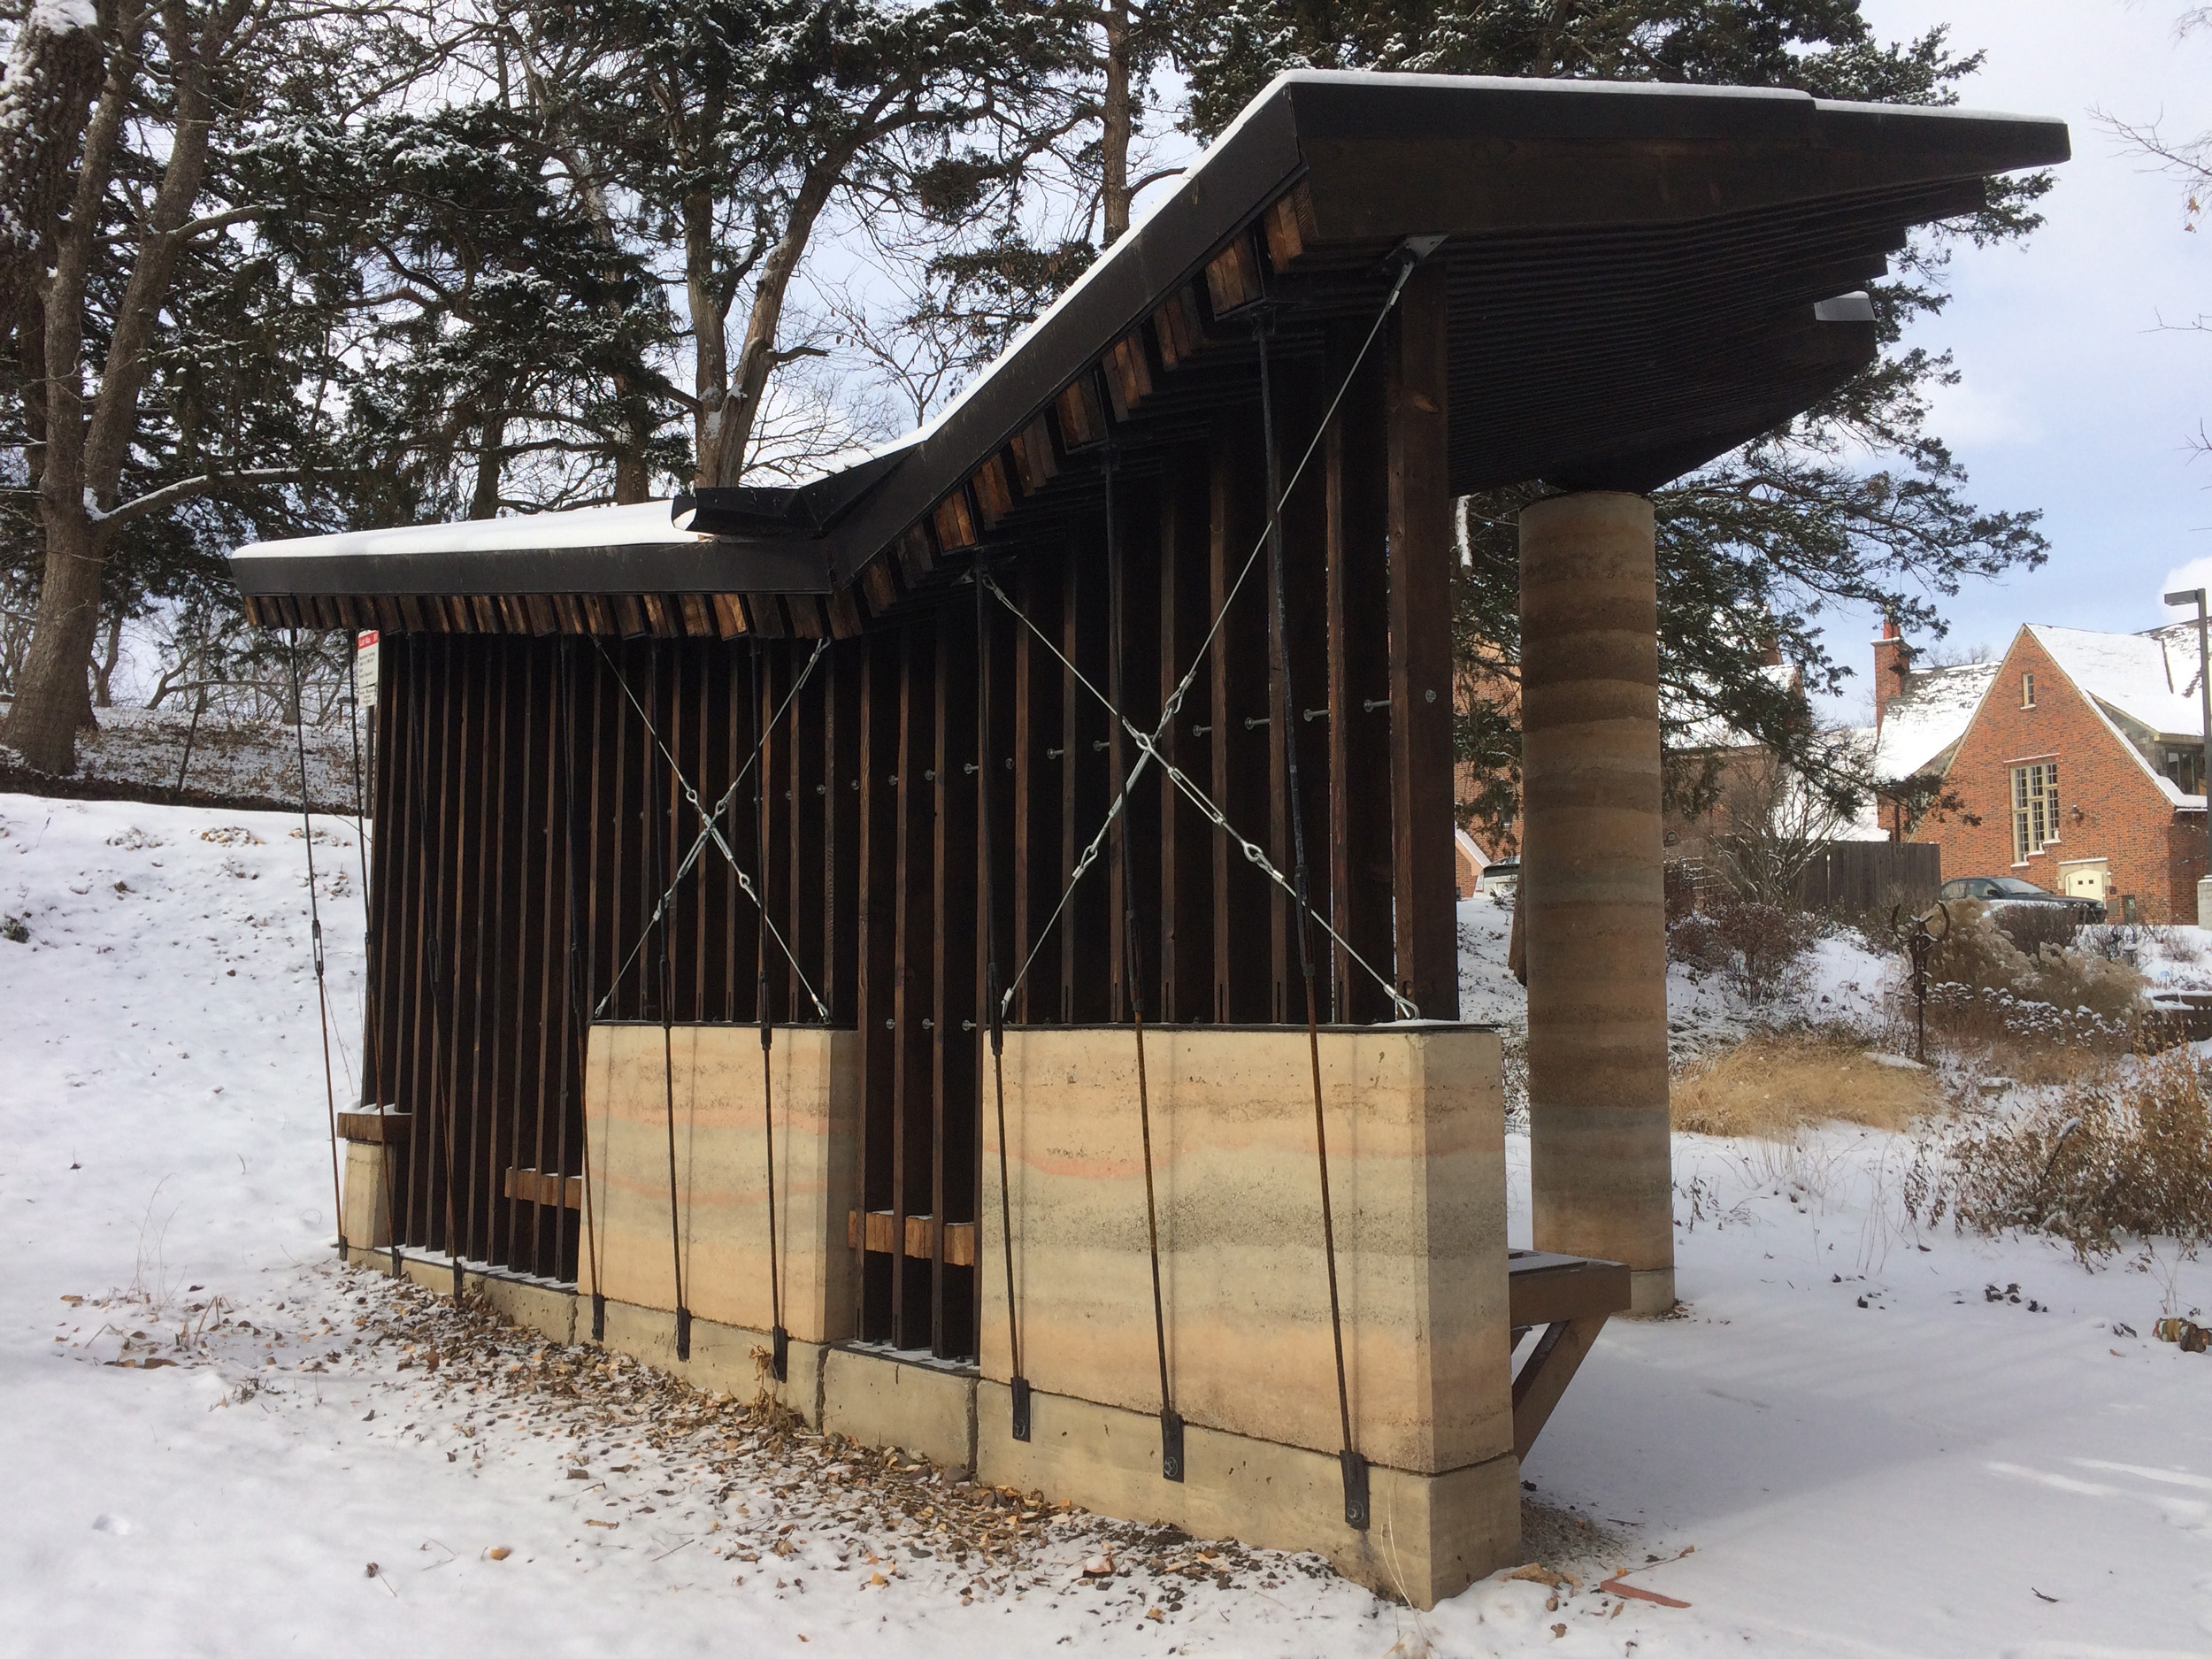 Sensory Pavilion, from behind the pavilion, in the snow